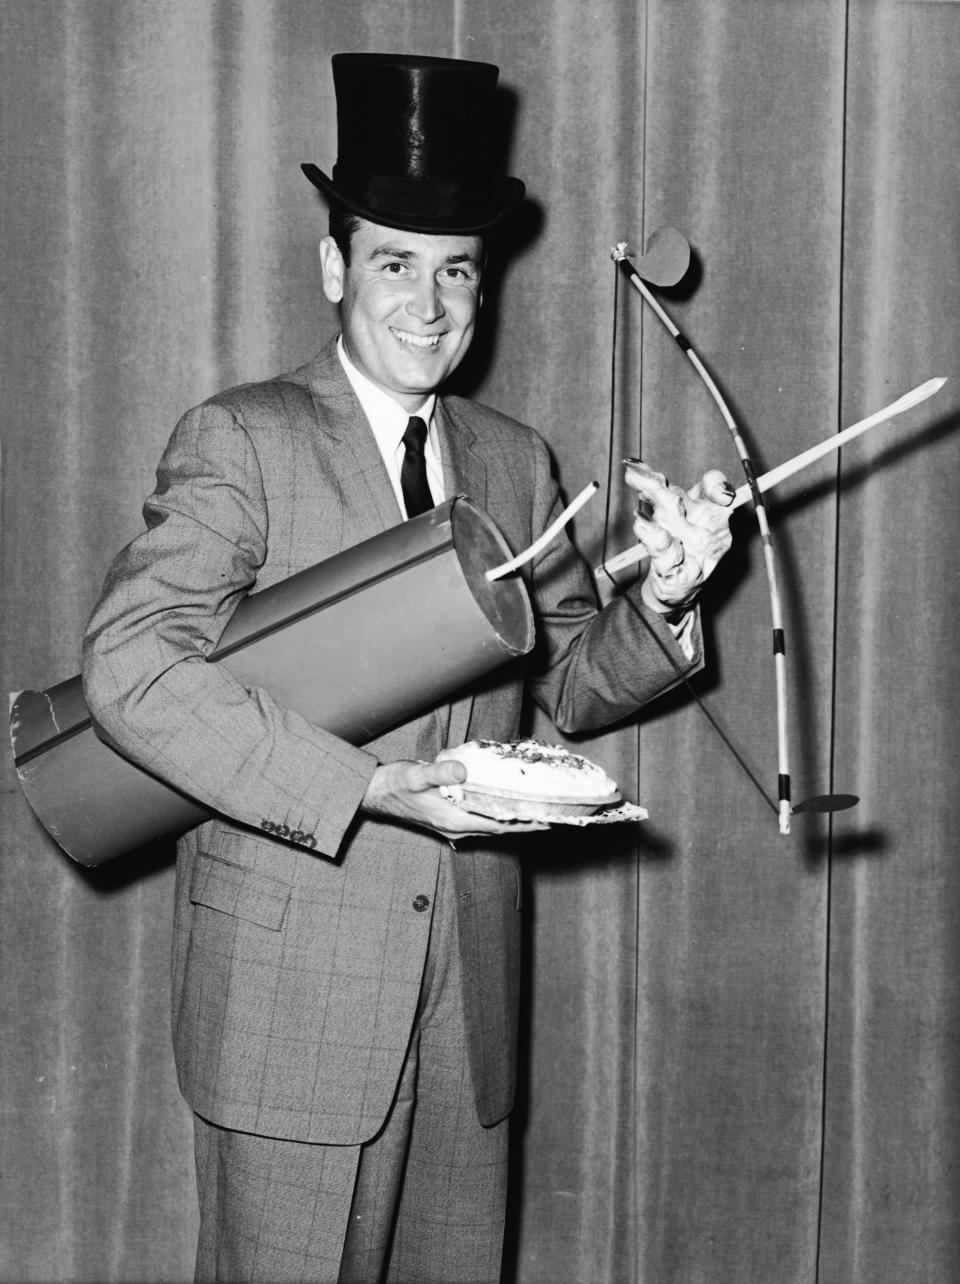 Publicity portrait of American radio and television show host Bob Barker as he poses with a number of props in preparation for hosting the television show 'Truth or Consequences,' January 4, 1957. The props include an oversized firecracker, a top hat, a cream pie, a rubber hand, and a toy bow and arrow set. (Photo by FPG/Getty Images)